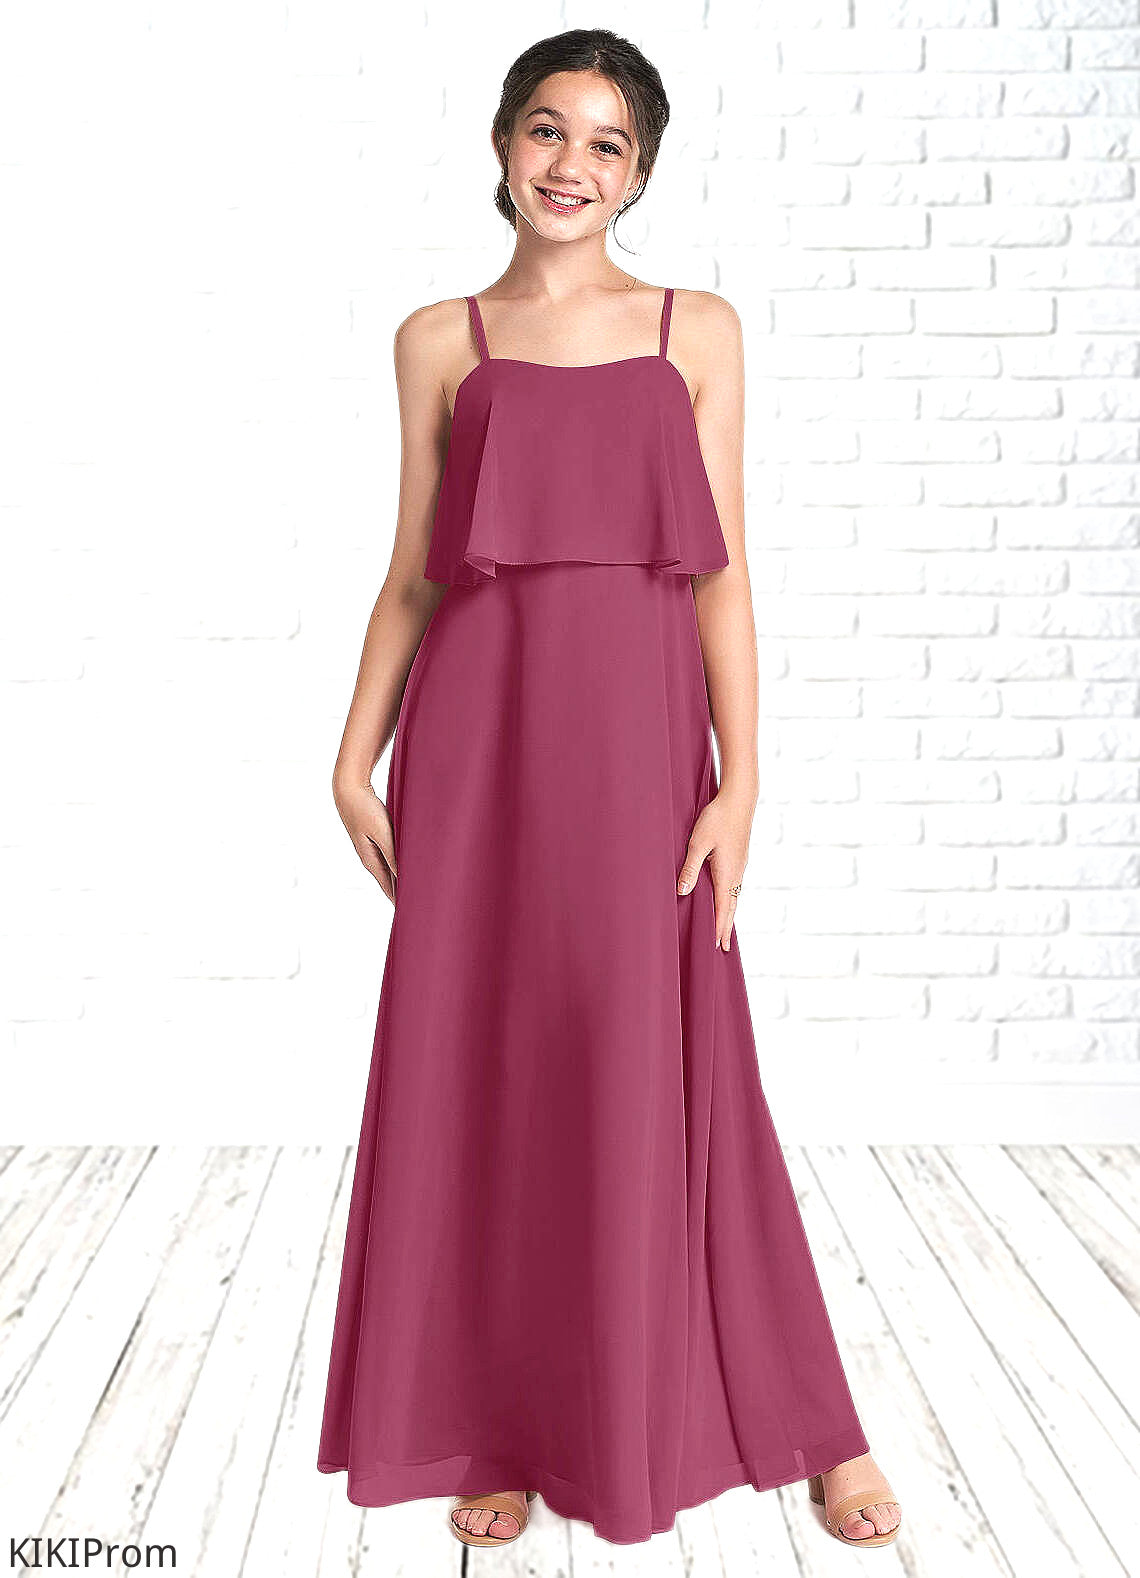 Anabelle A-Line Ruched Chiffon Floor-Length Junior Bridesmaid Dress Mulberry DZP0022874